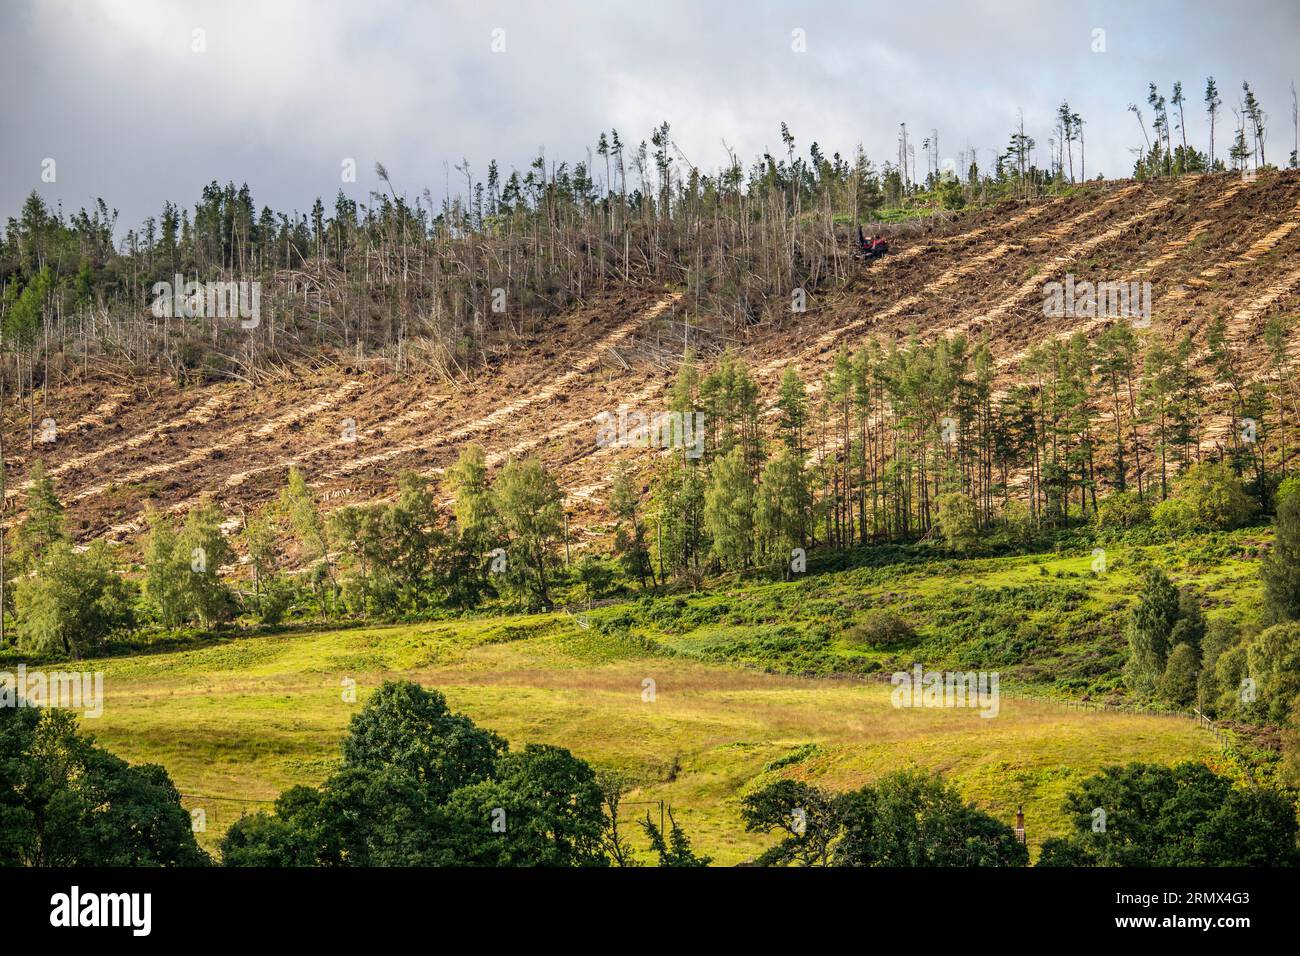 A tree felling machine clears a hillside forestry commission plantatiion near Harbottle, Northumberland, following damage caused by storm Arwen. Stock Photo